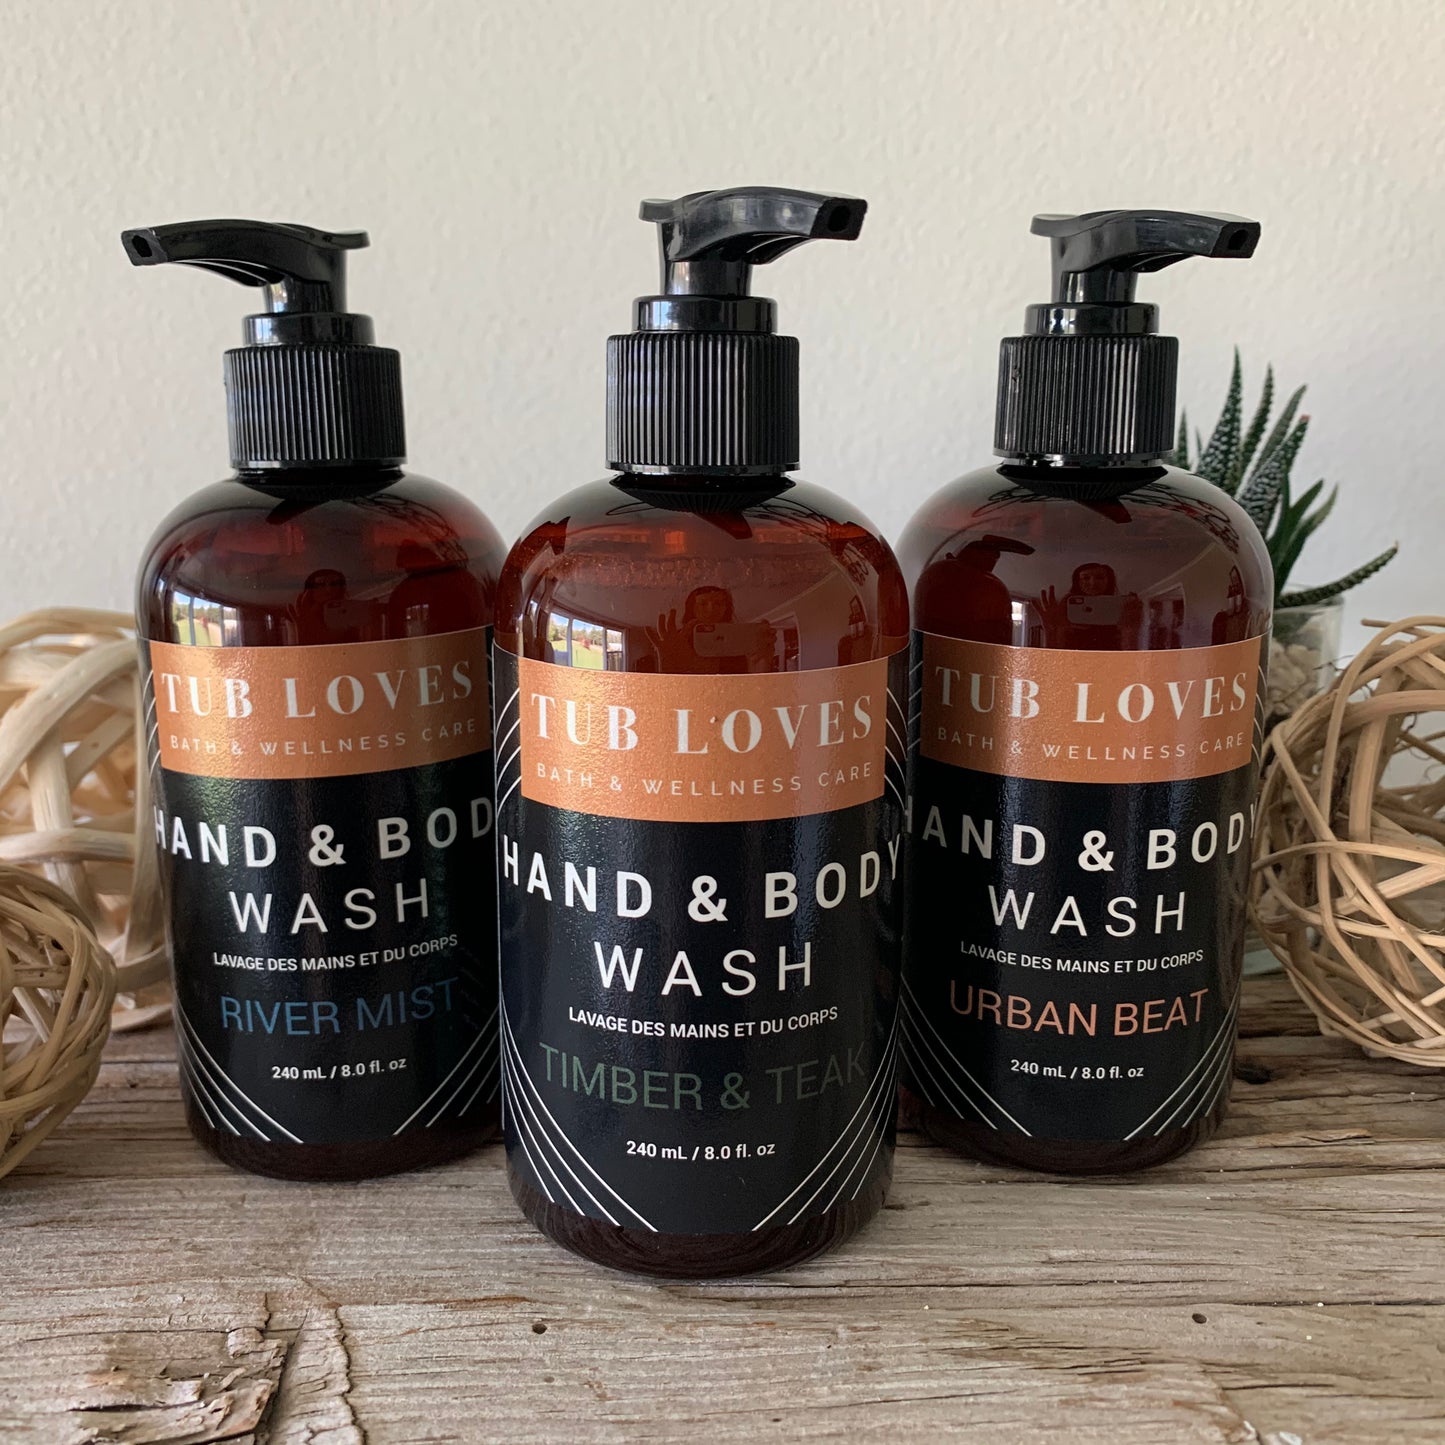 RIVER MIST - HAND AND BODY WASH - Tub Loves